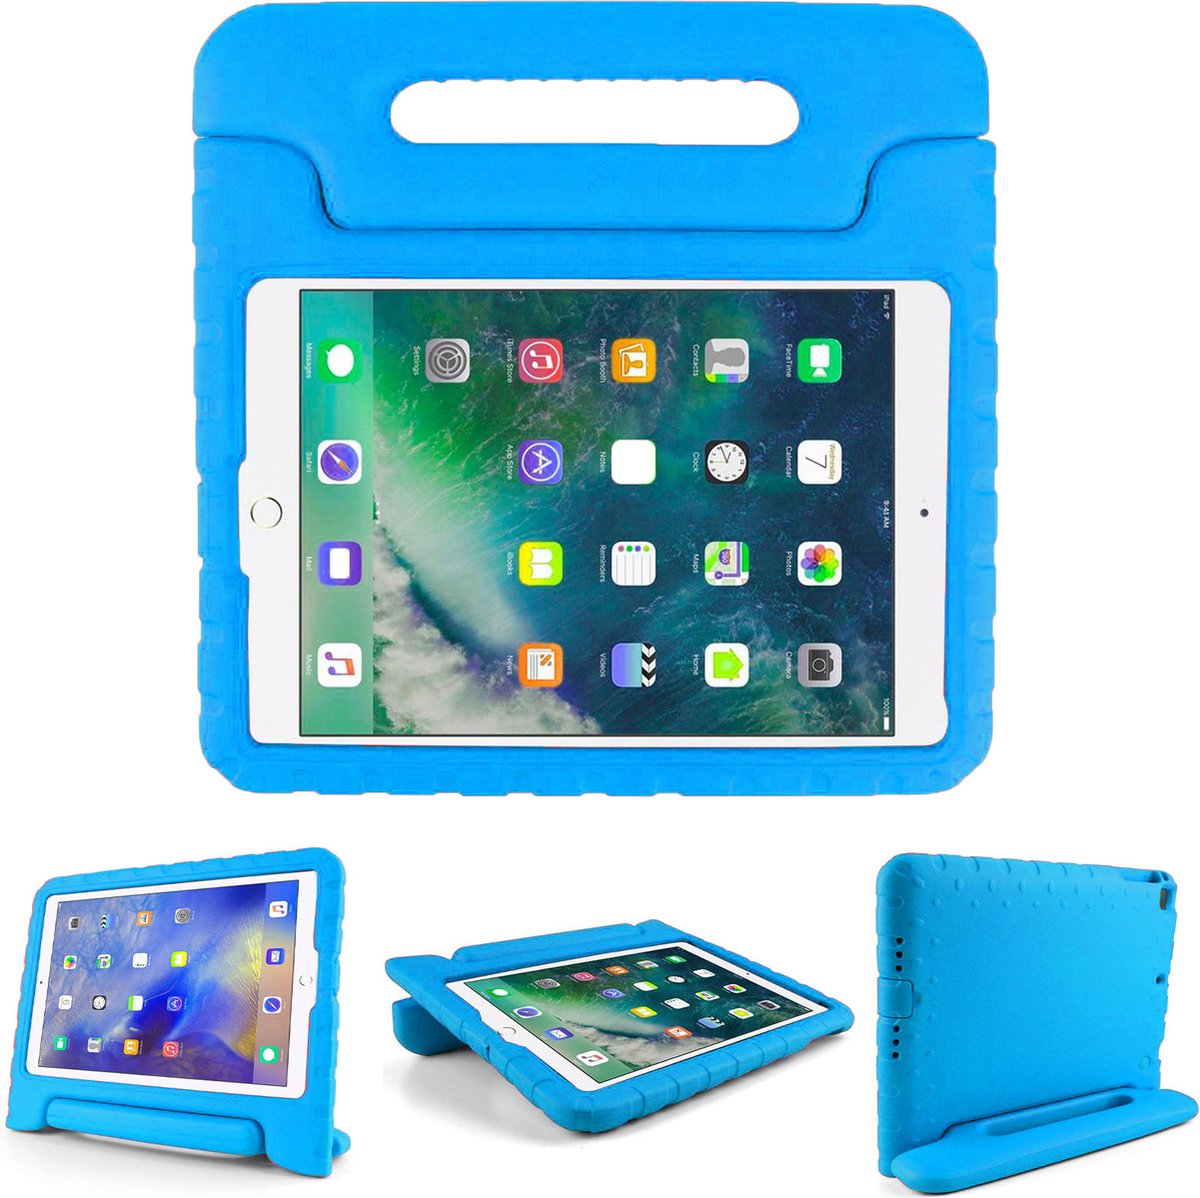 Apple iPad Air 4 10.9 (2020) Hoes - Kinder Tablet Hoes - Blauw